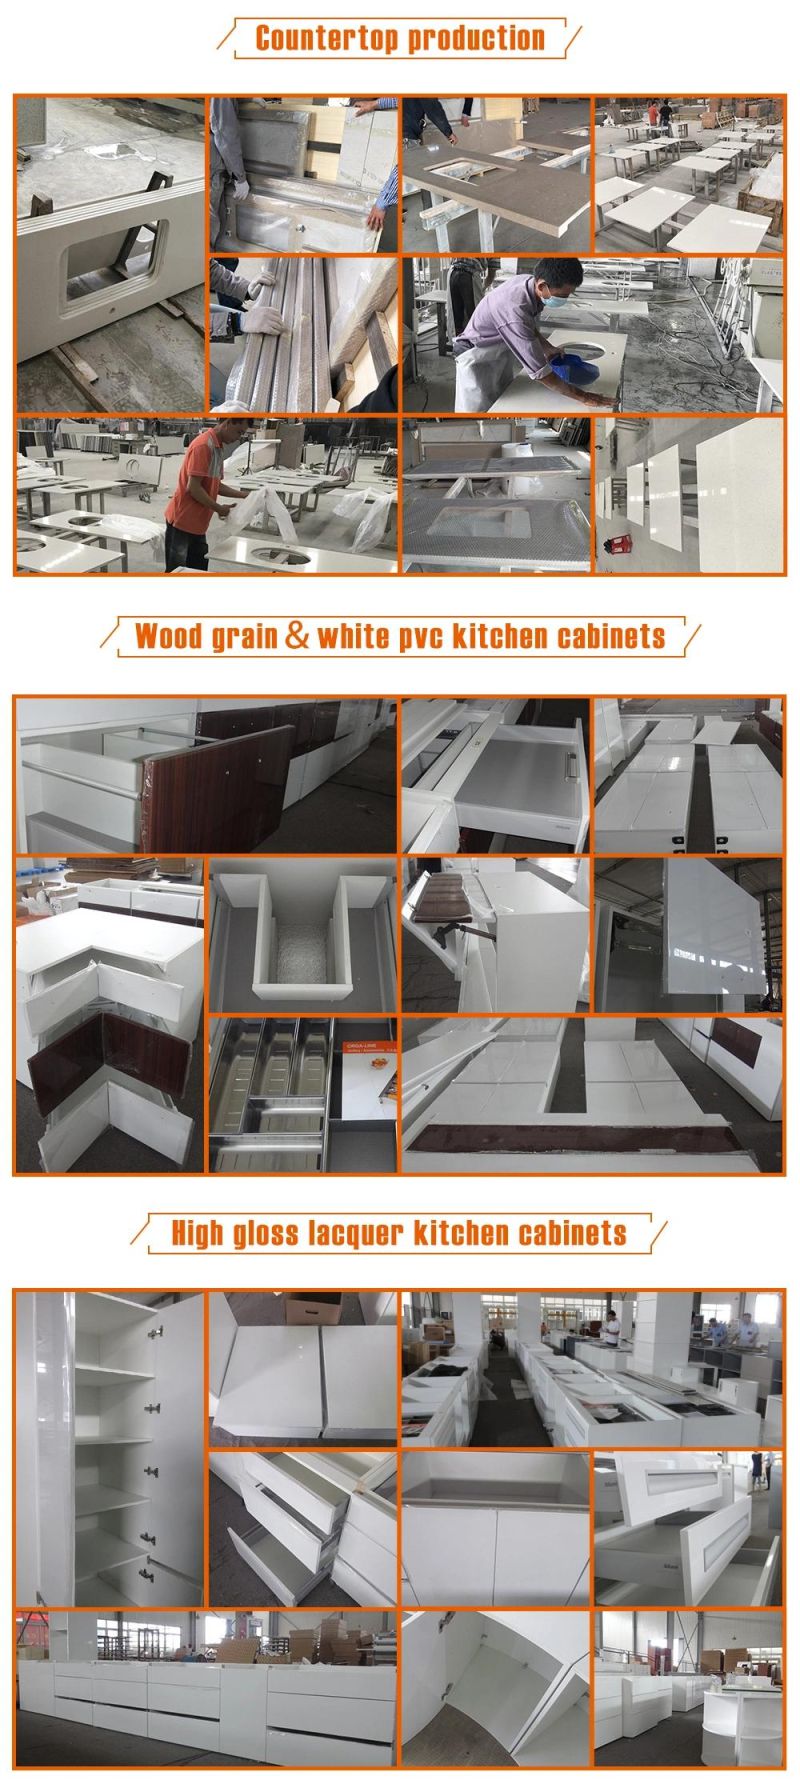 Covered Melamine Durability Online Maple Colors Kitchen Cabinets Furniture